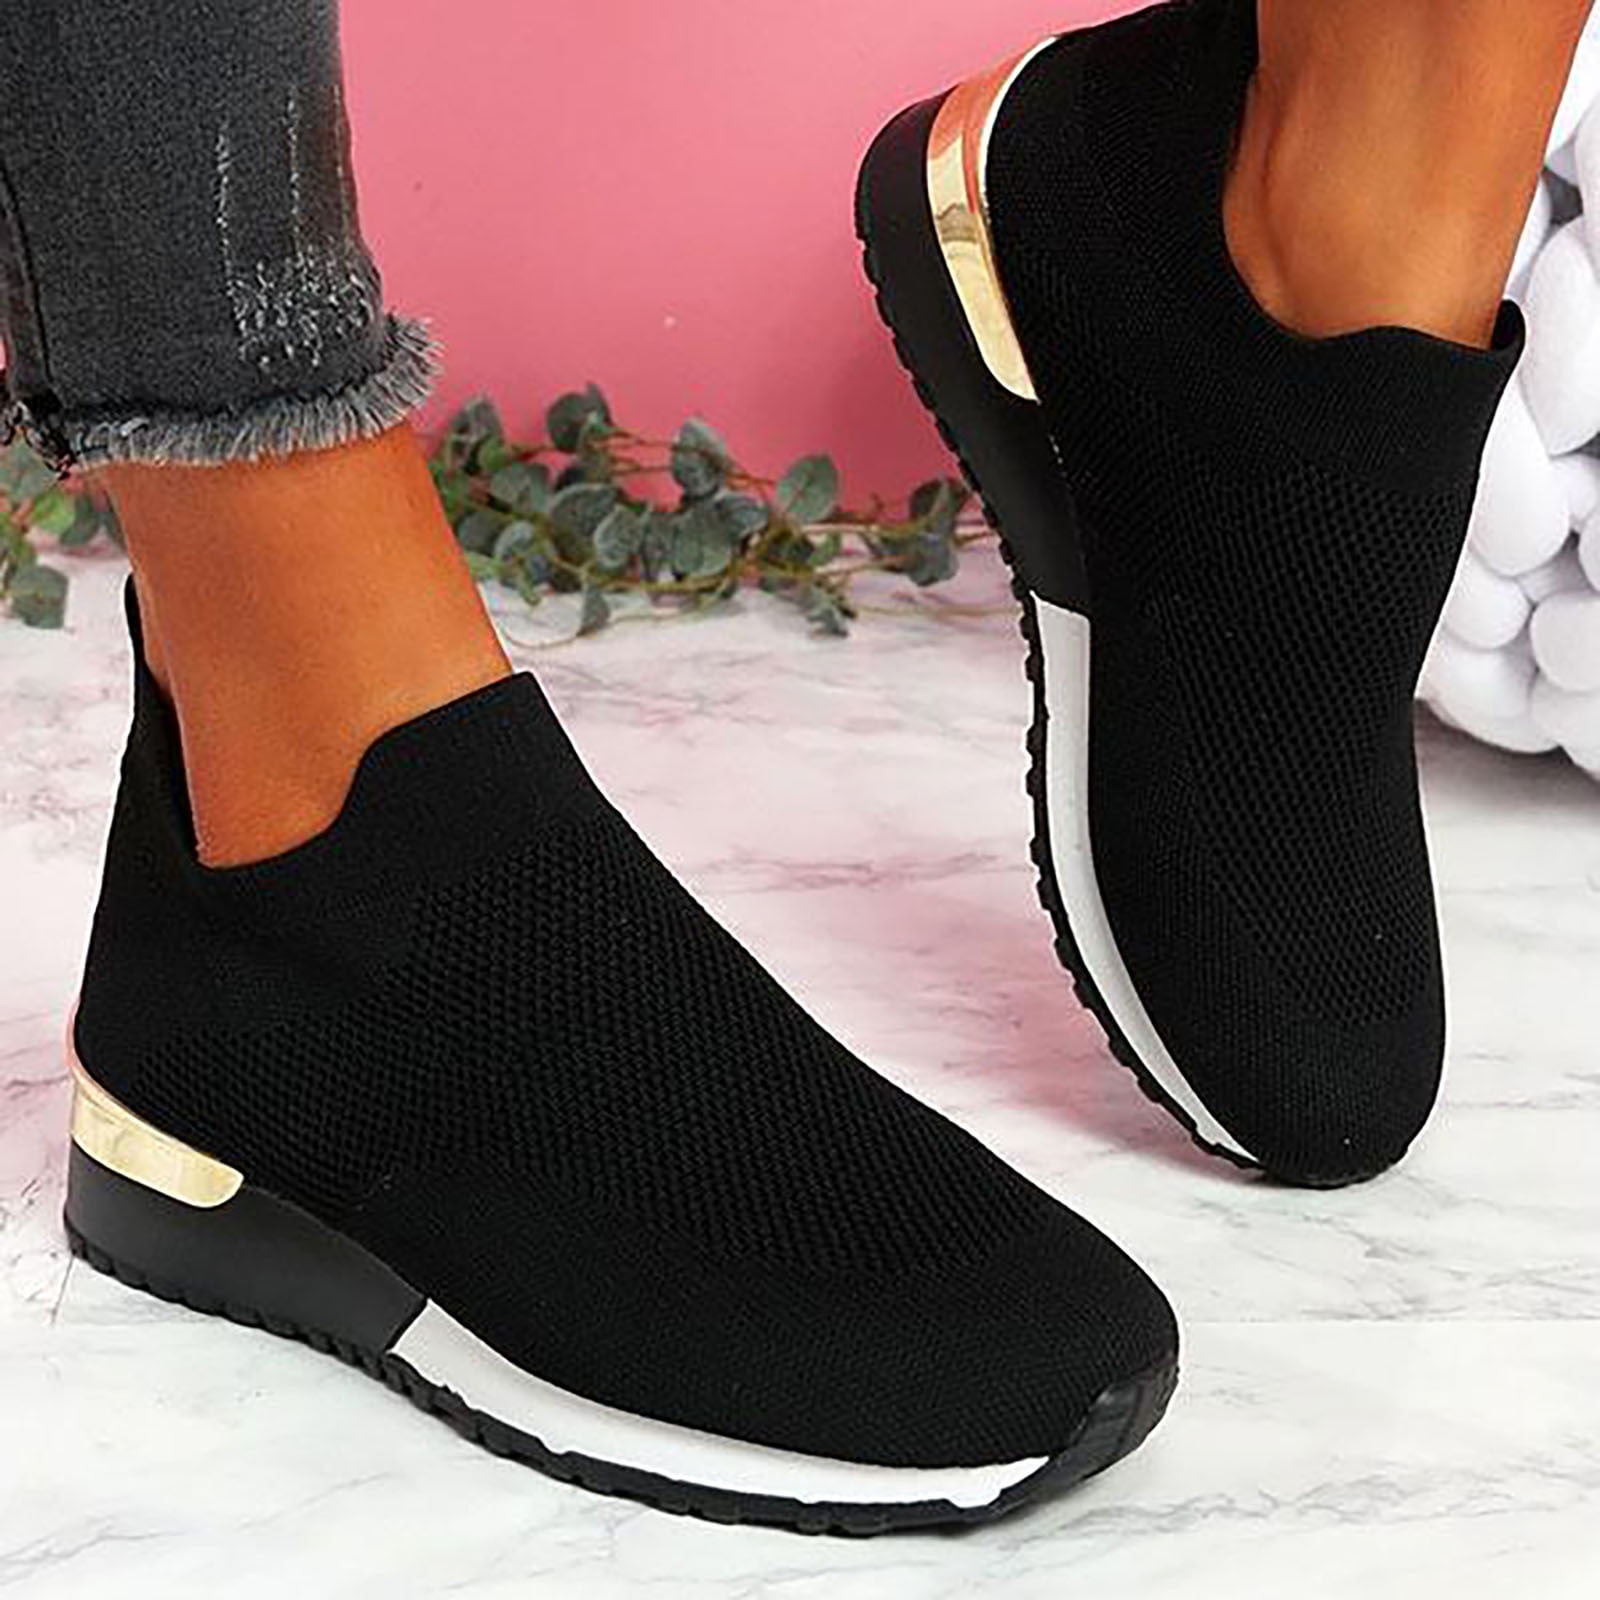 qucoqpe Large Size Mesh Stretch Cloth Sandals Women Summer Comfortable Casual Sports Shoes on Clearance - Walmart.com